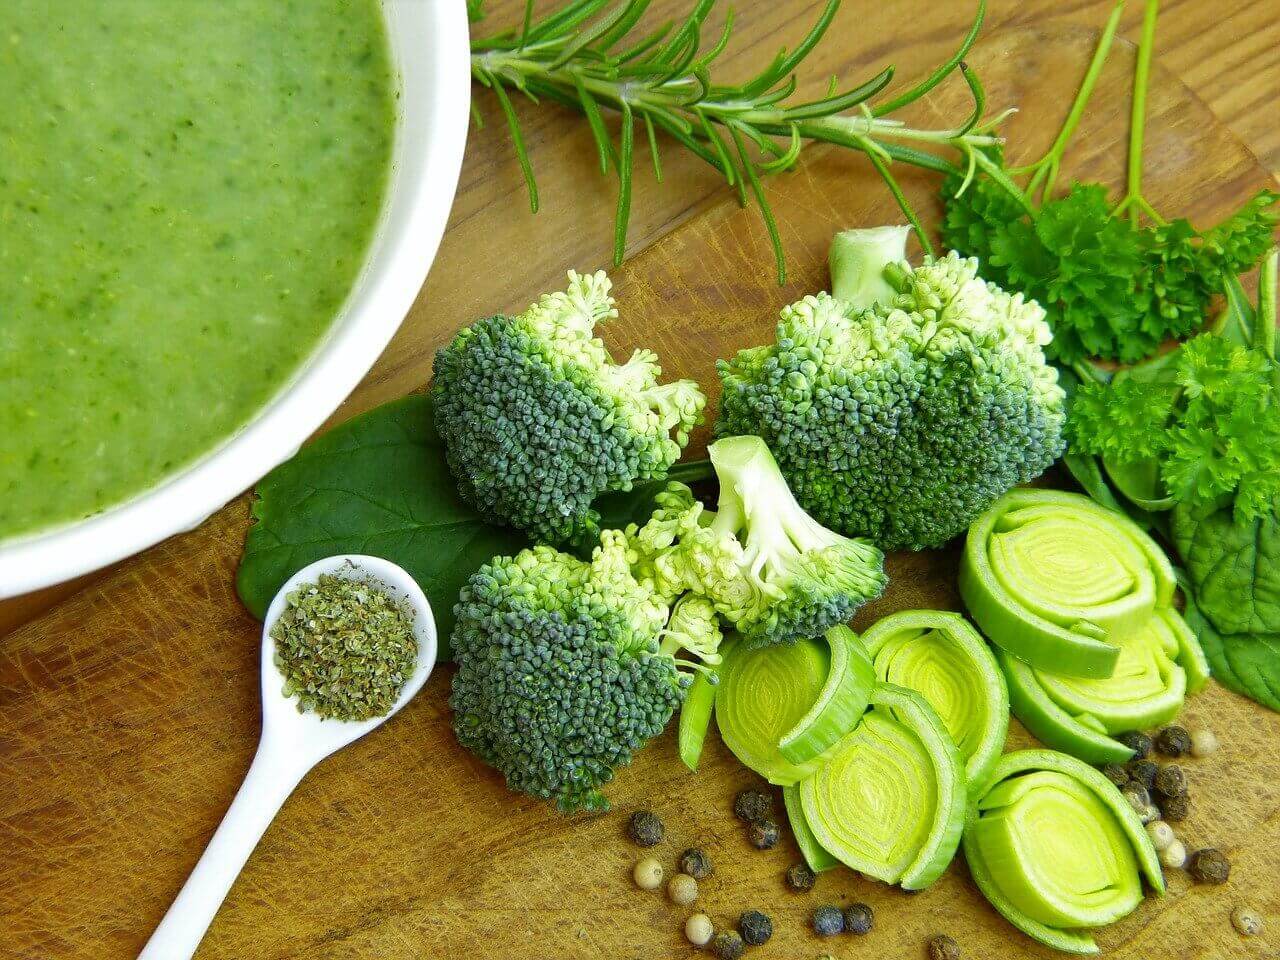 The ingredients for broccoli soup.